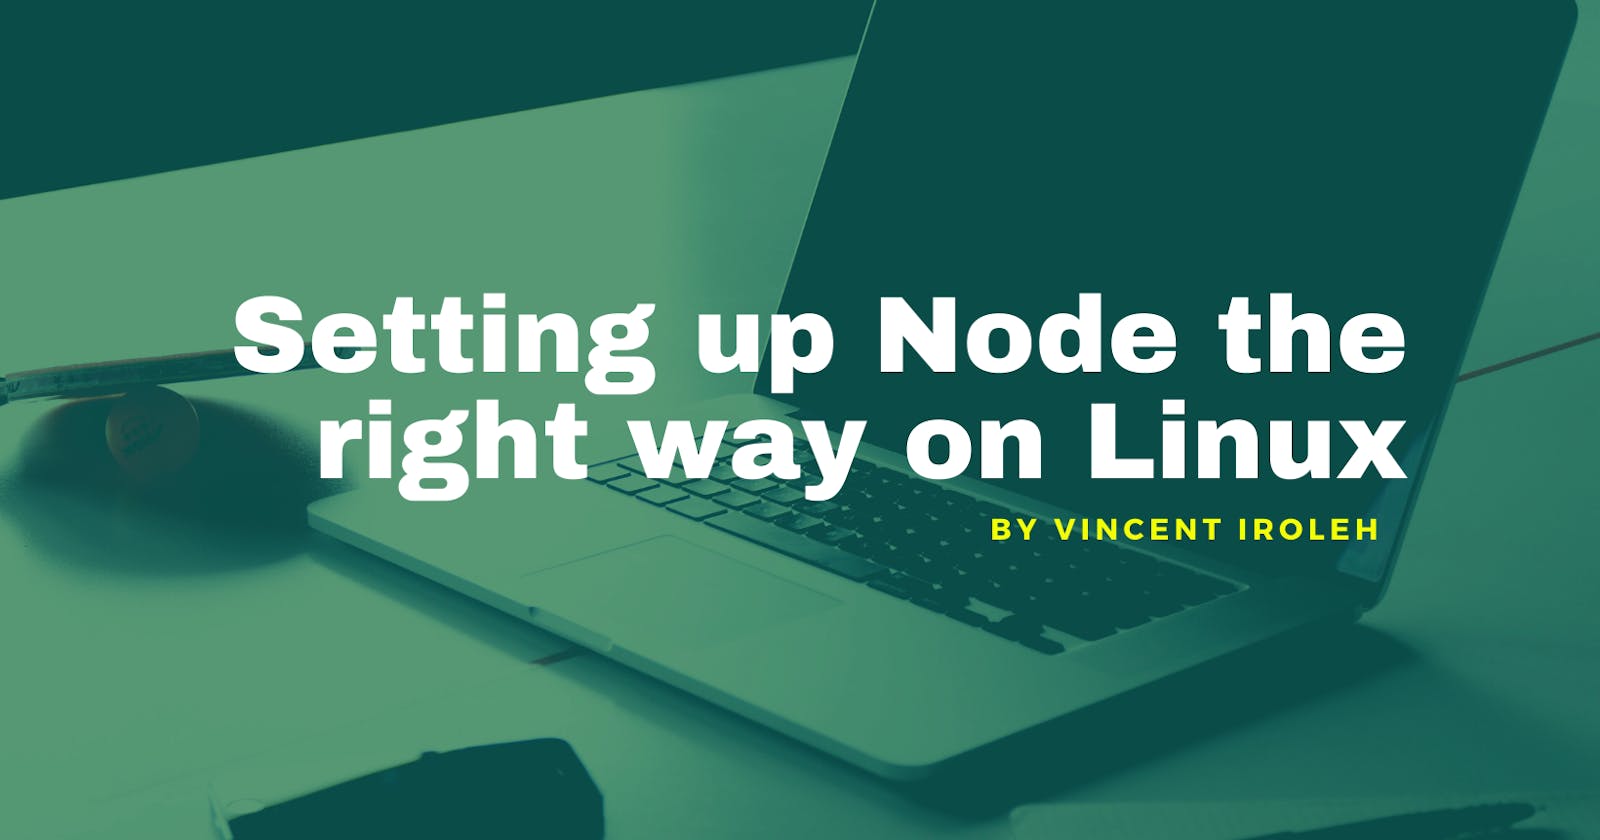 Setting up Node the right way on Linux